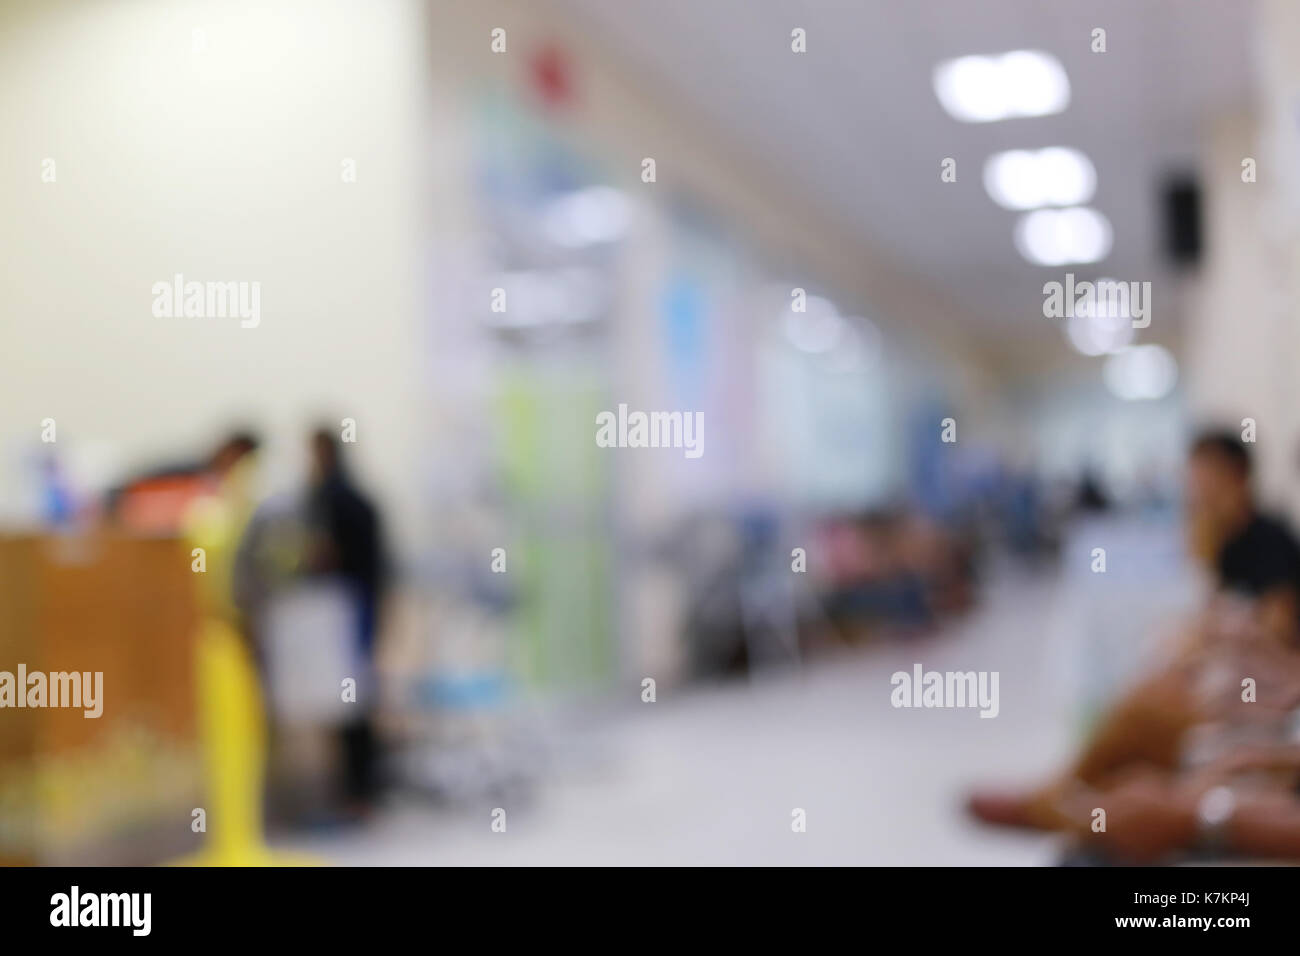 Background image of a hospital blur for design backdrop to work or Presentation. Stock Photo